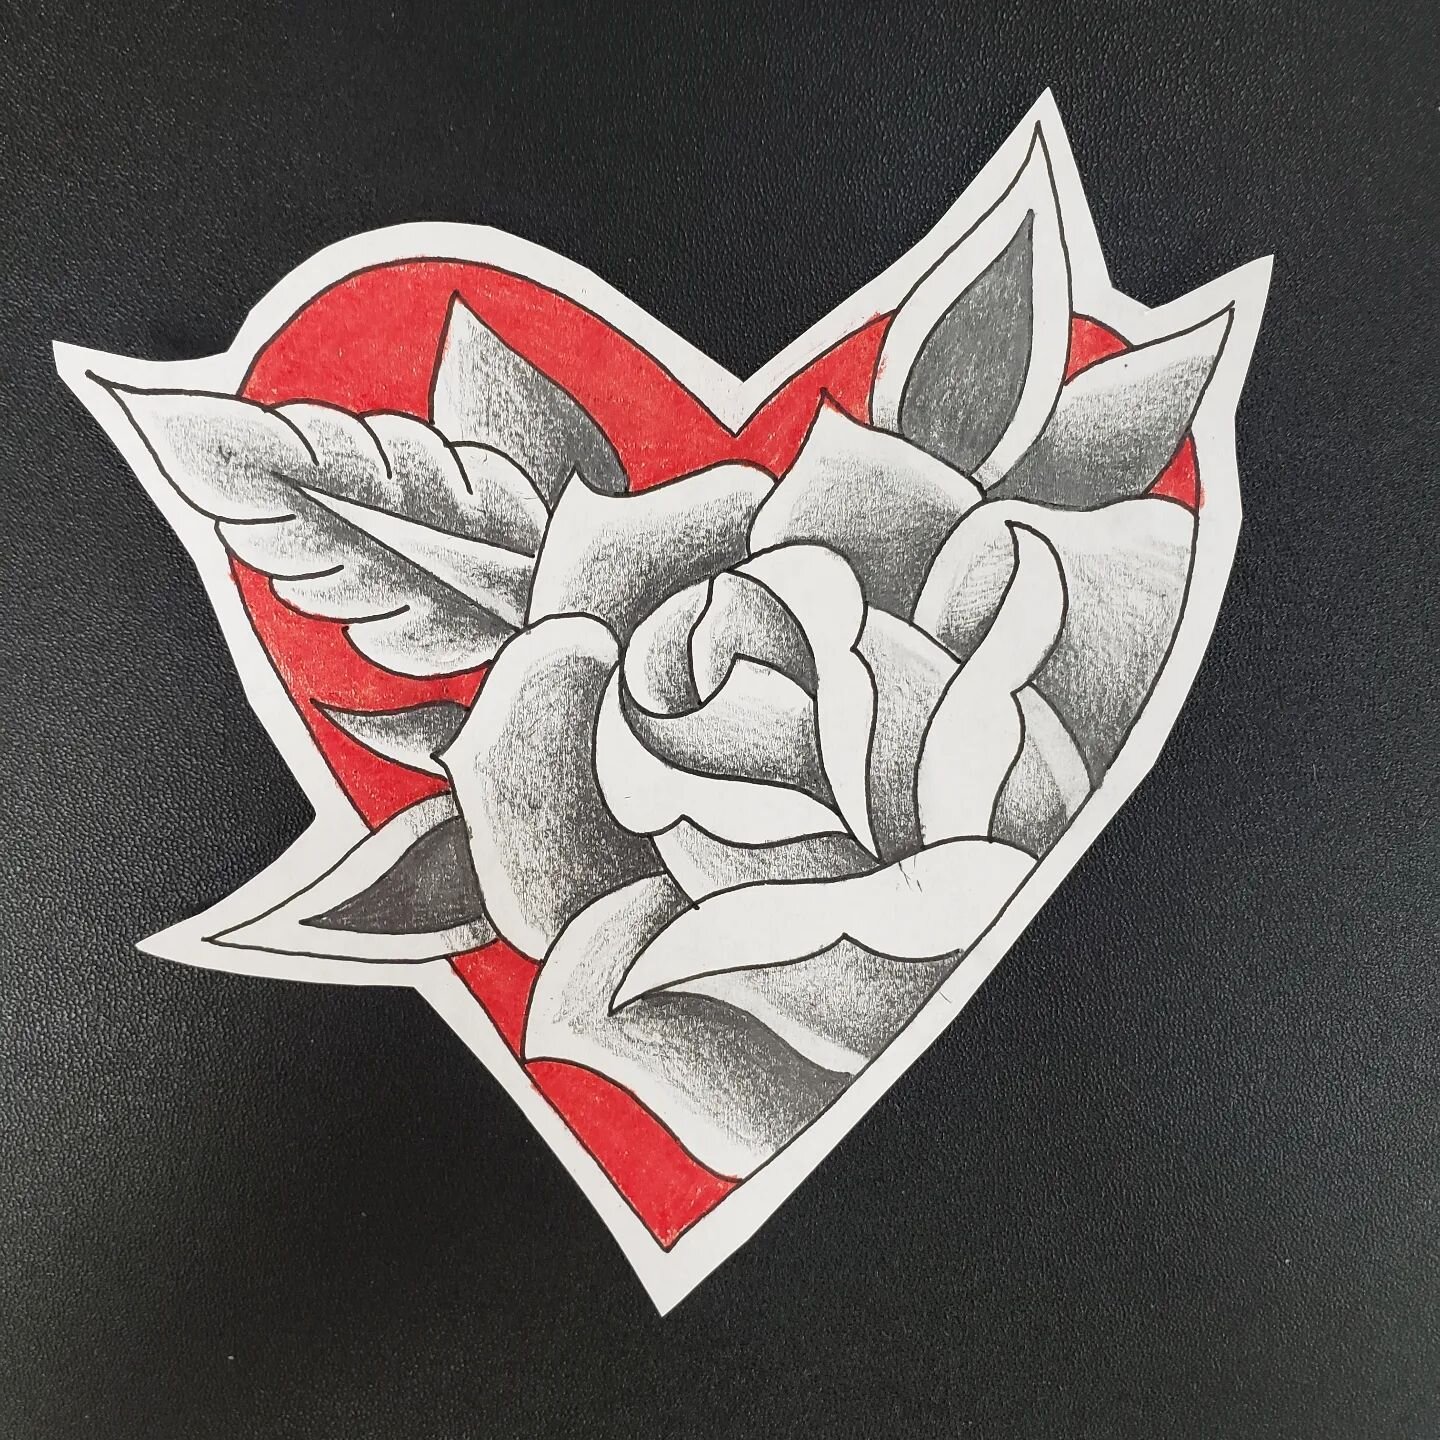 These designs would look great in black and gray ❤
.
.
.
#tattoodesigns #clevelandtattooer #tattooapprentice #clevelandapprentice #tattooapprentice #rosetattoo #rosetattoos #rosetattoodesigns #roseflash #clevelandart #tattoosavailable #gettattooed #t